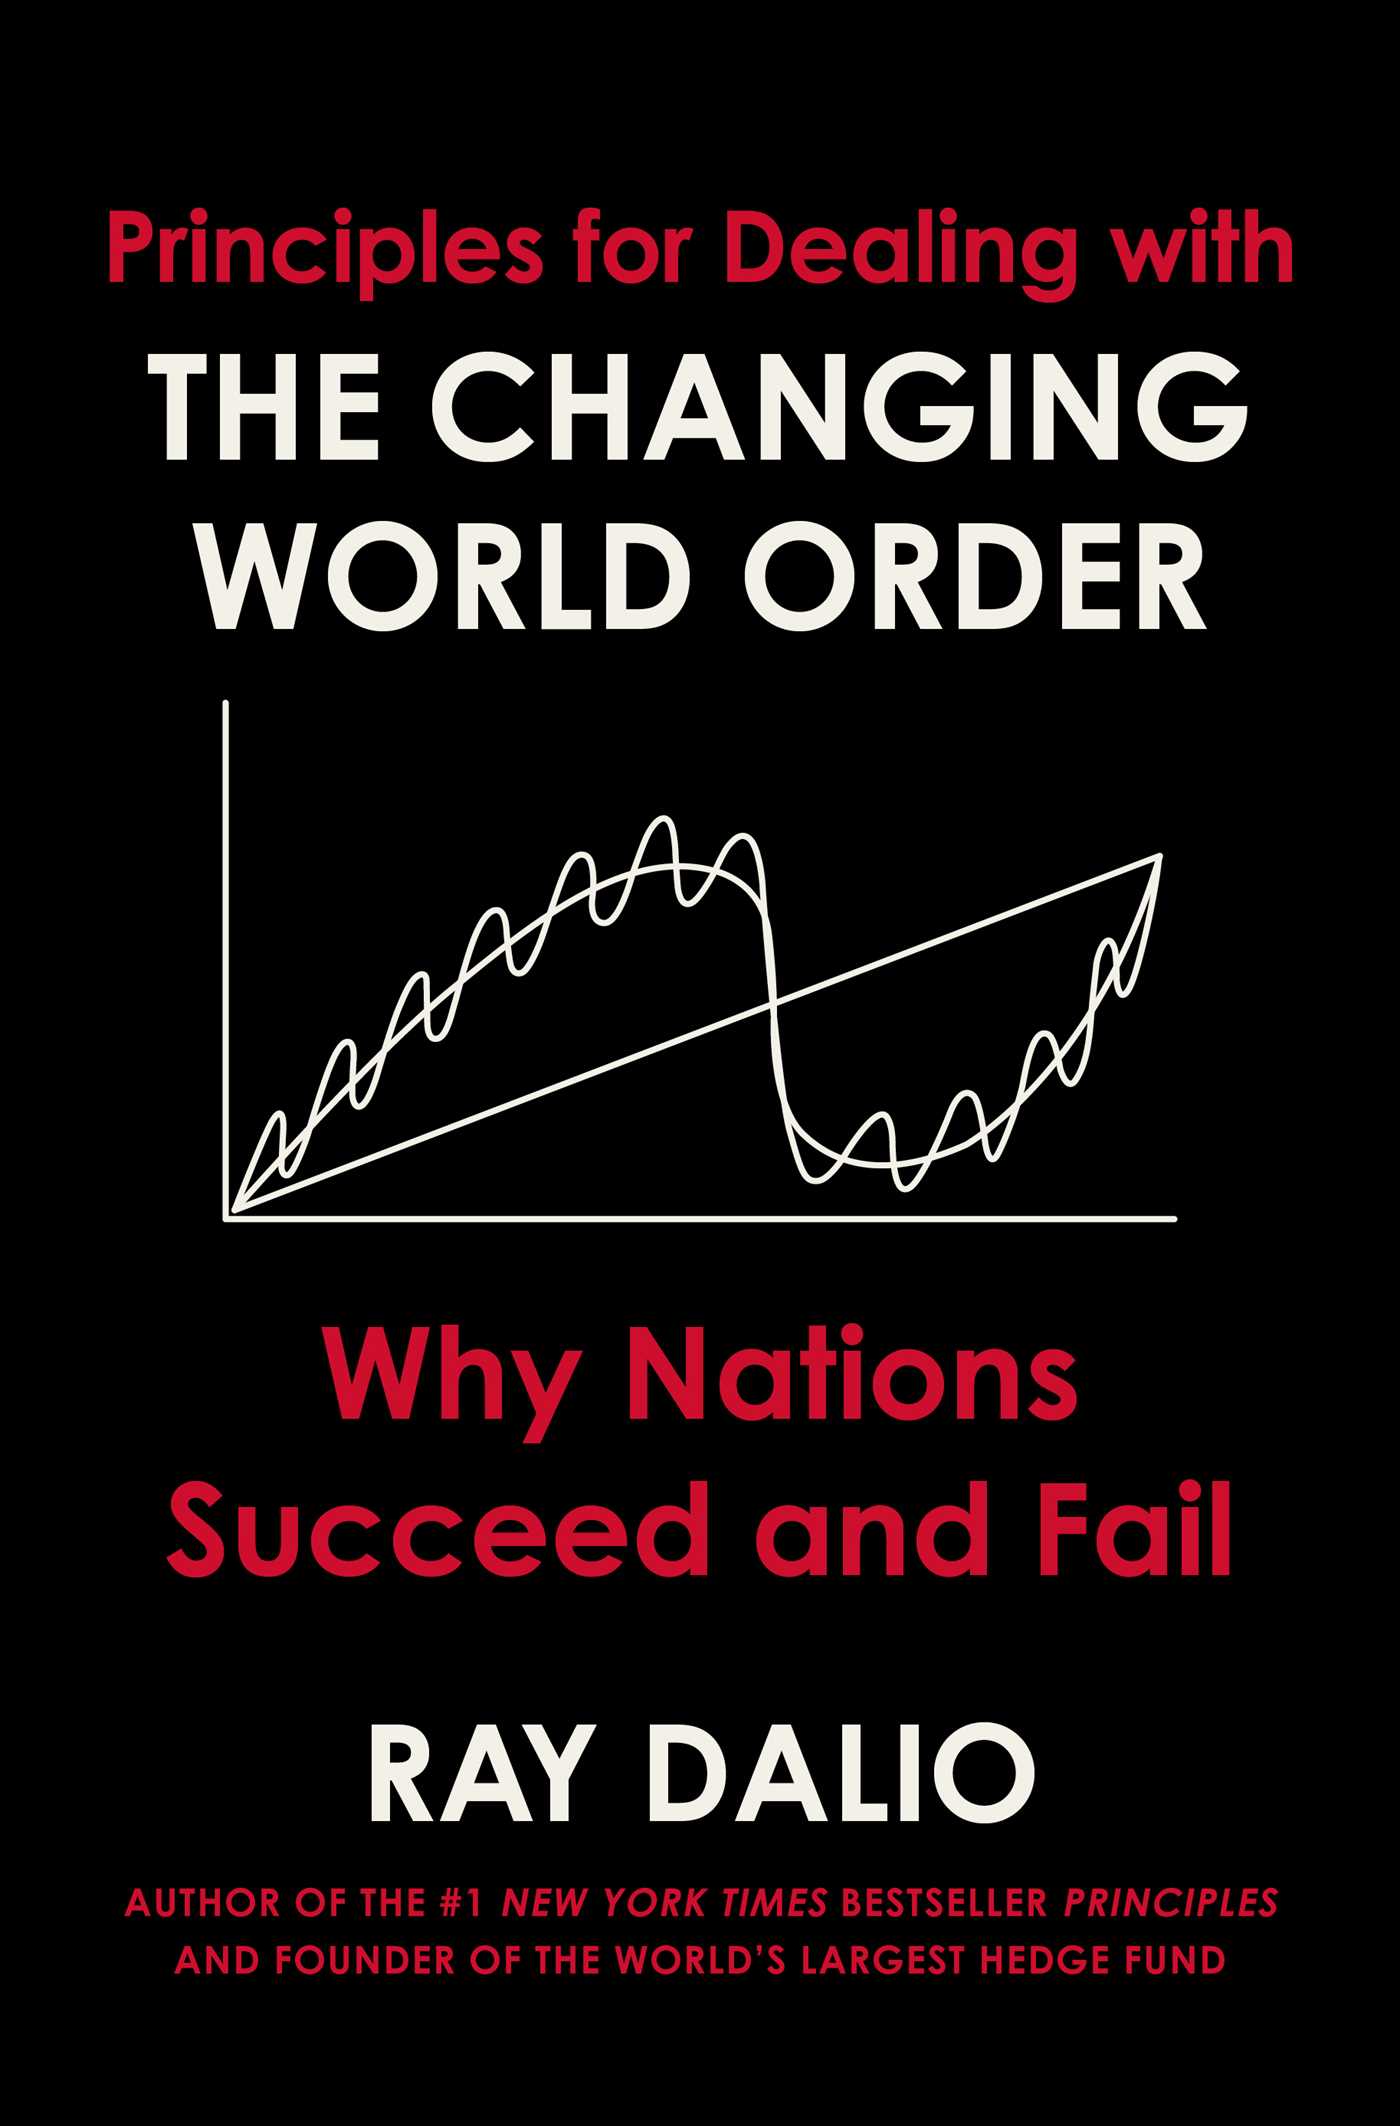 [EPUB] Principles For Dealing With the Changing World Order: Why Nations Succeed and Fail by Ray Dalio